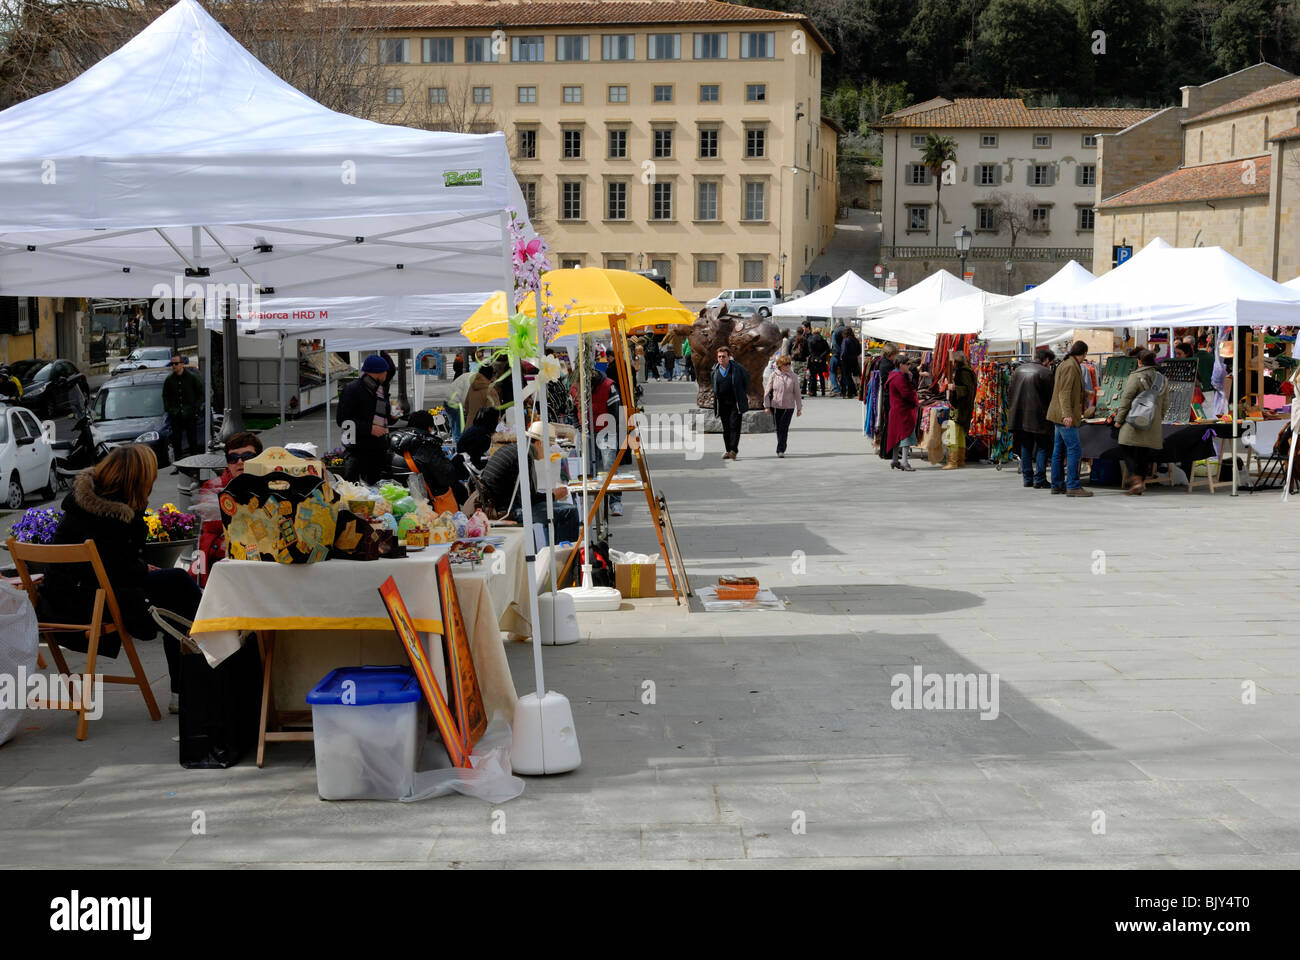 The Sunday market at the heart of the ancient Etruscan town of Fiesole. Piazza Mino da Fiesole, Fiesole, Tuscany, Italy, Europe. Stock Photo